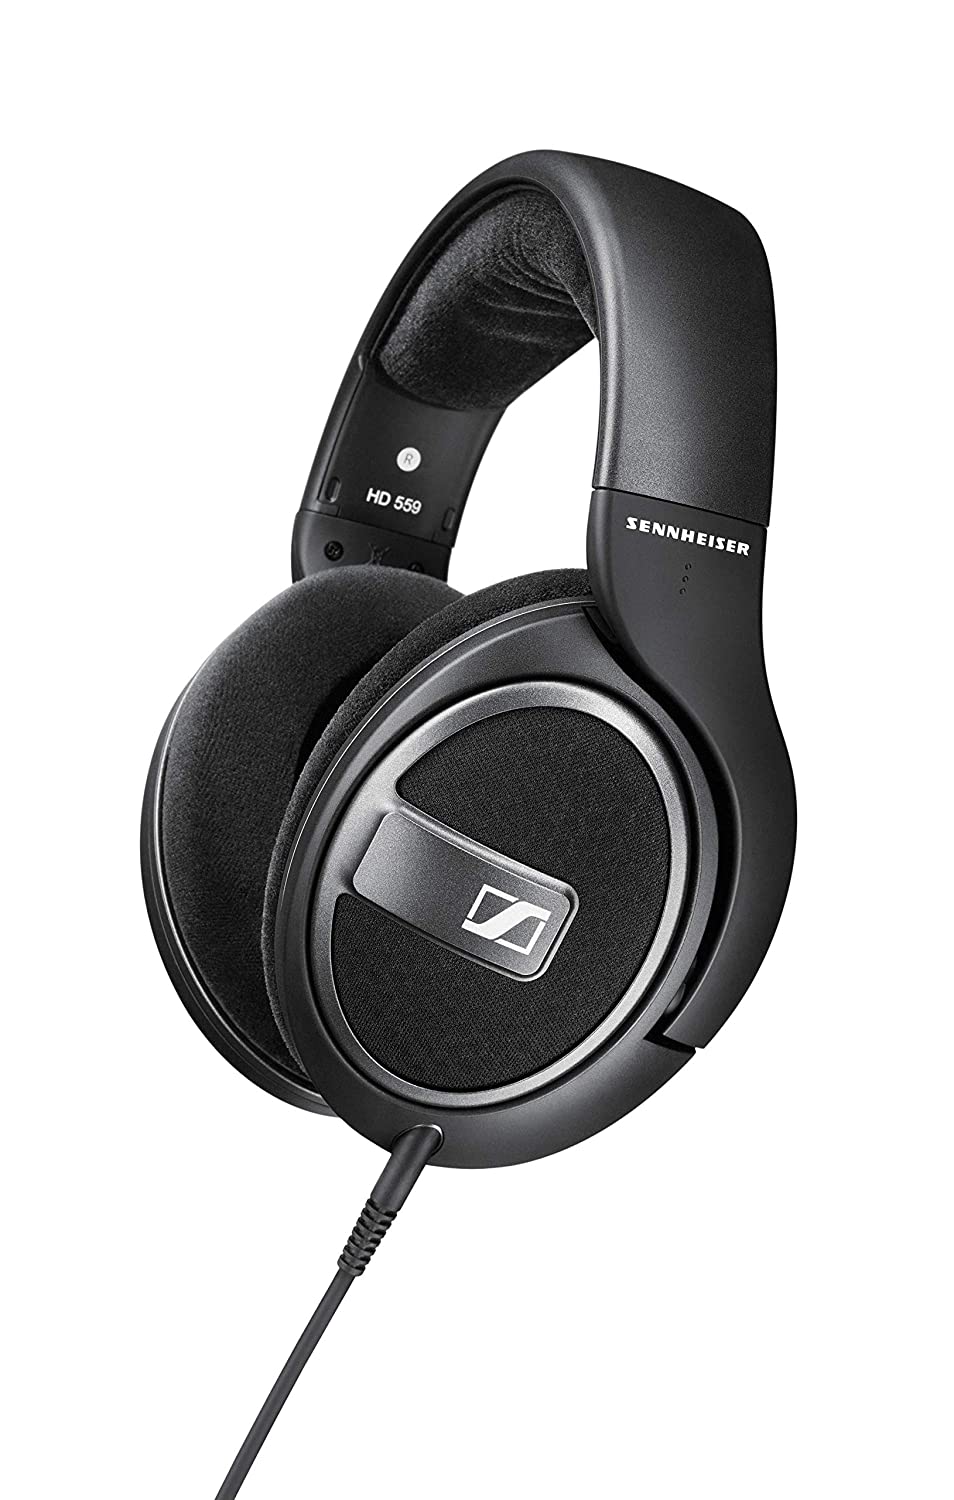 Sennheiser HD 559 Wired Over Ear Headphones Without Mic Black